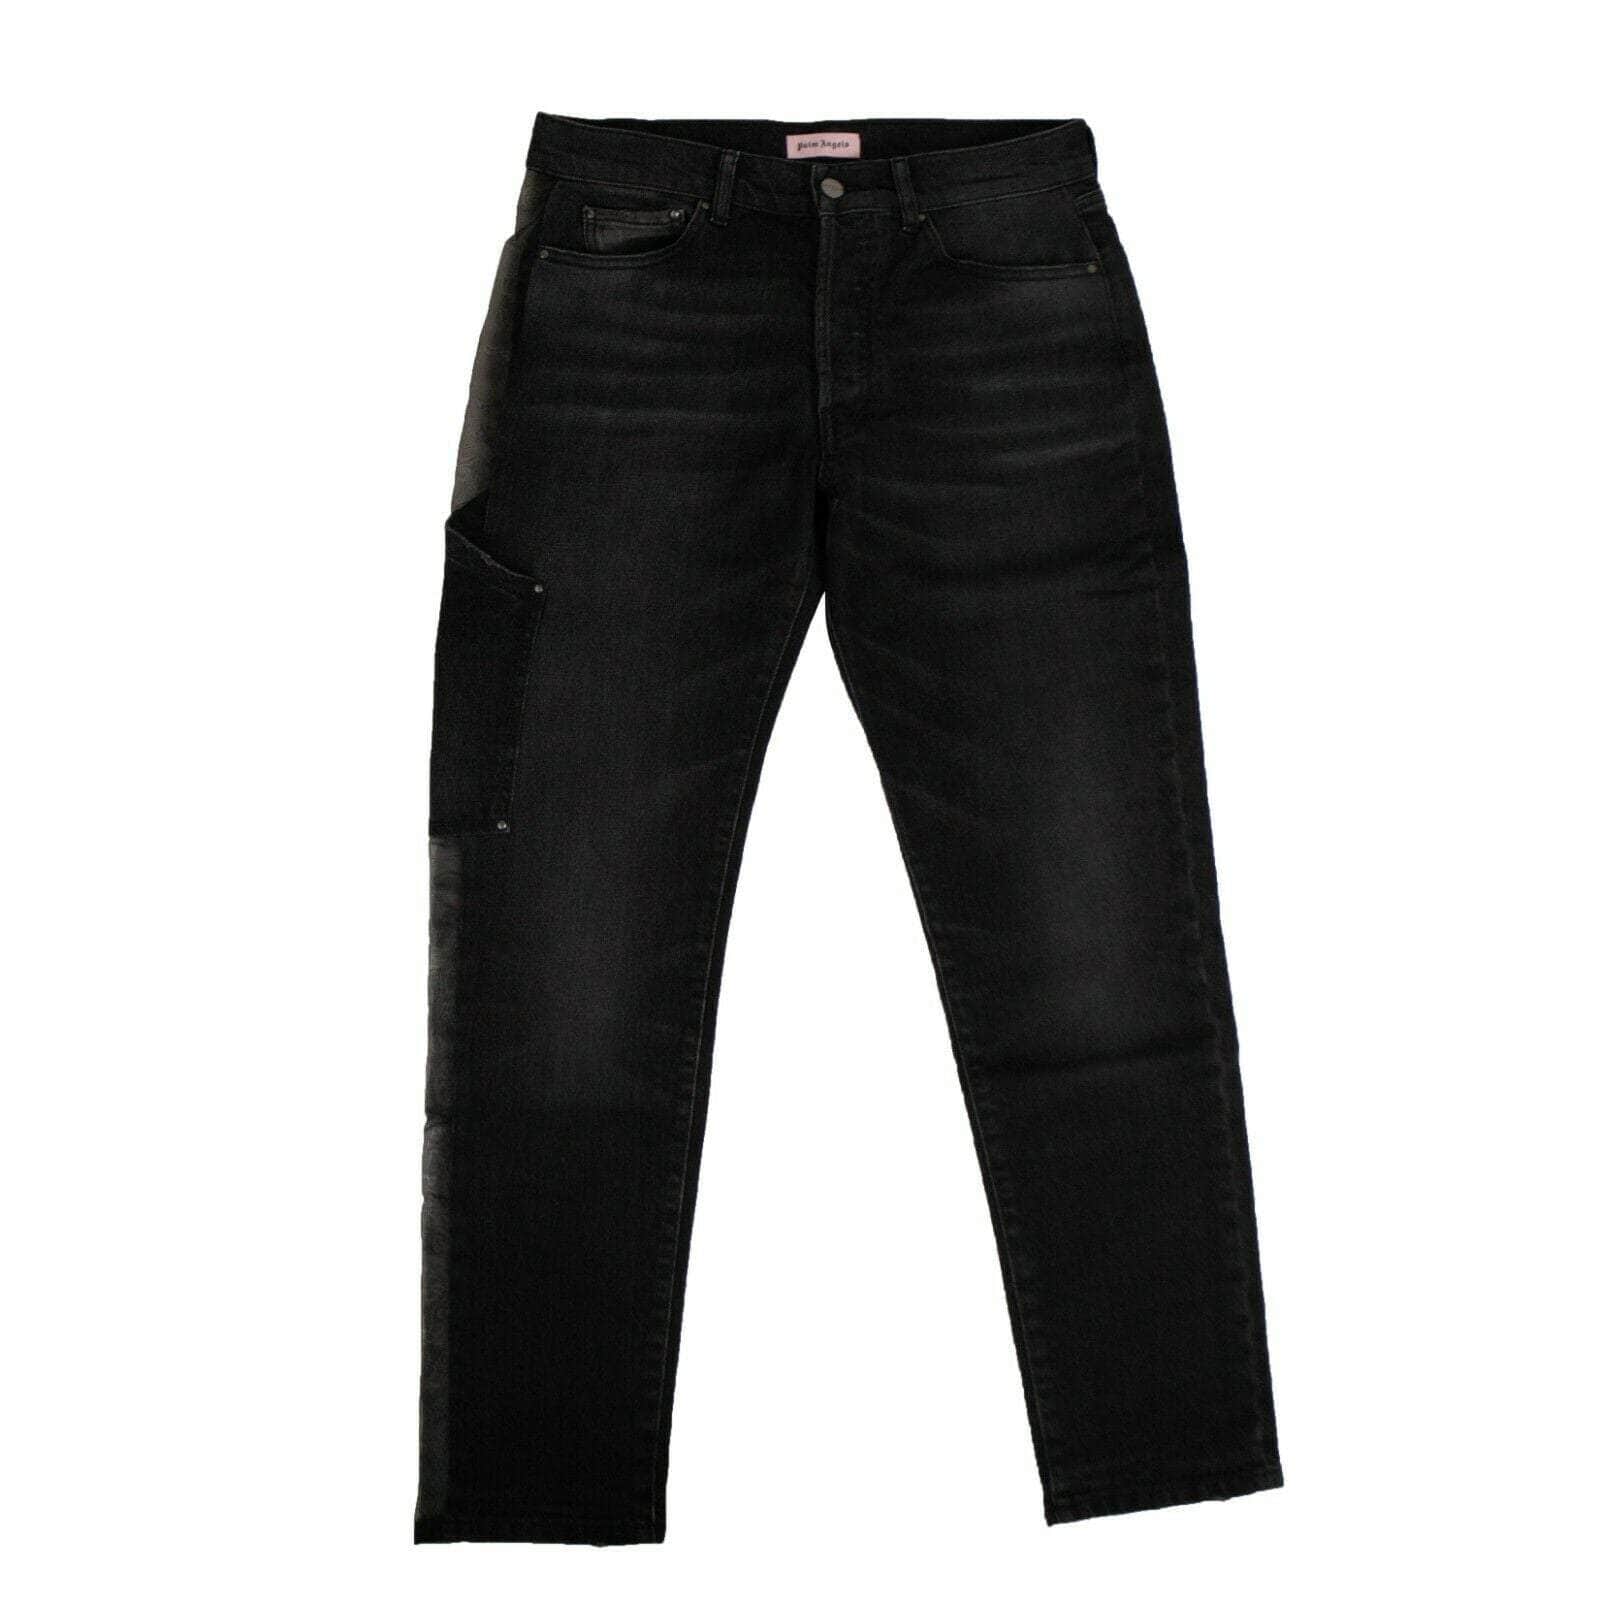 PALM ANGELS 250-500, couponcollection, gender-womens, main-clothing, palm-angels, size-26, size-28 28 Black Sheer Side Stripes Jeans 82NGG-PA-1440/28 82NGG-PA-1440/28